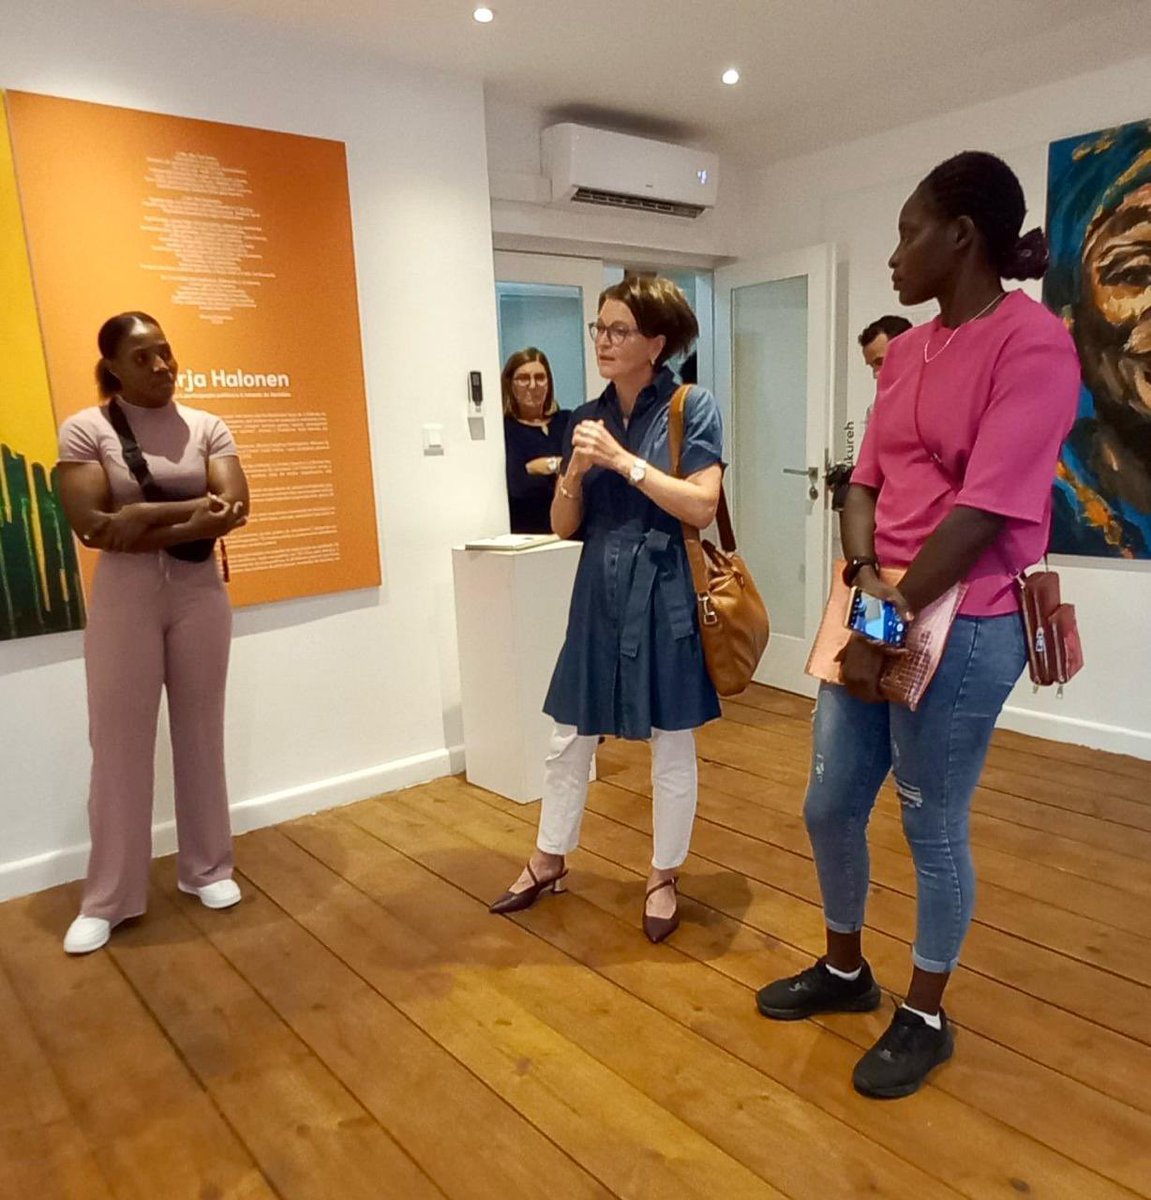 What a wonderful finale to our @iwasbornagir1 exhibition by @MinnaPietarinen in #Maputo! The stars of Minna’s Mozambique-themed painting and poem, boxers Rady Gramane and Alcinda Panguane, came to see the powerful works of the exhibition today. #empowerment #sports